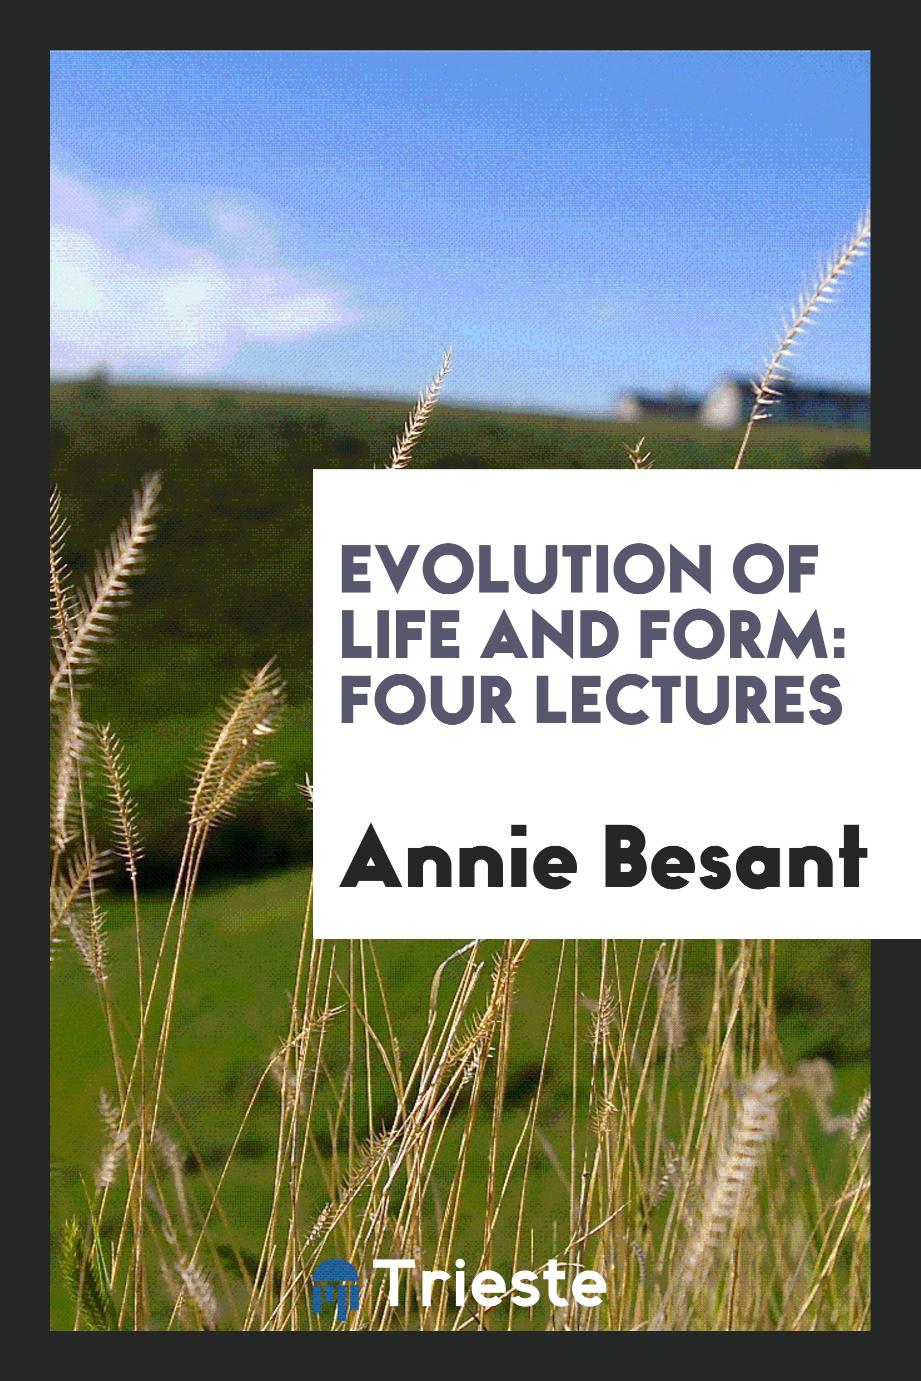 Evolution of Life and Form: Four Lectures